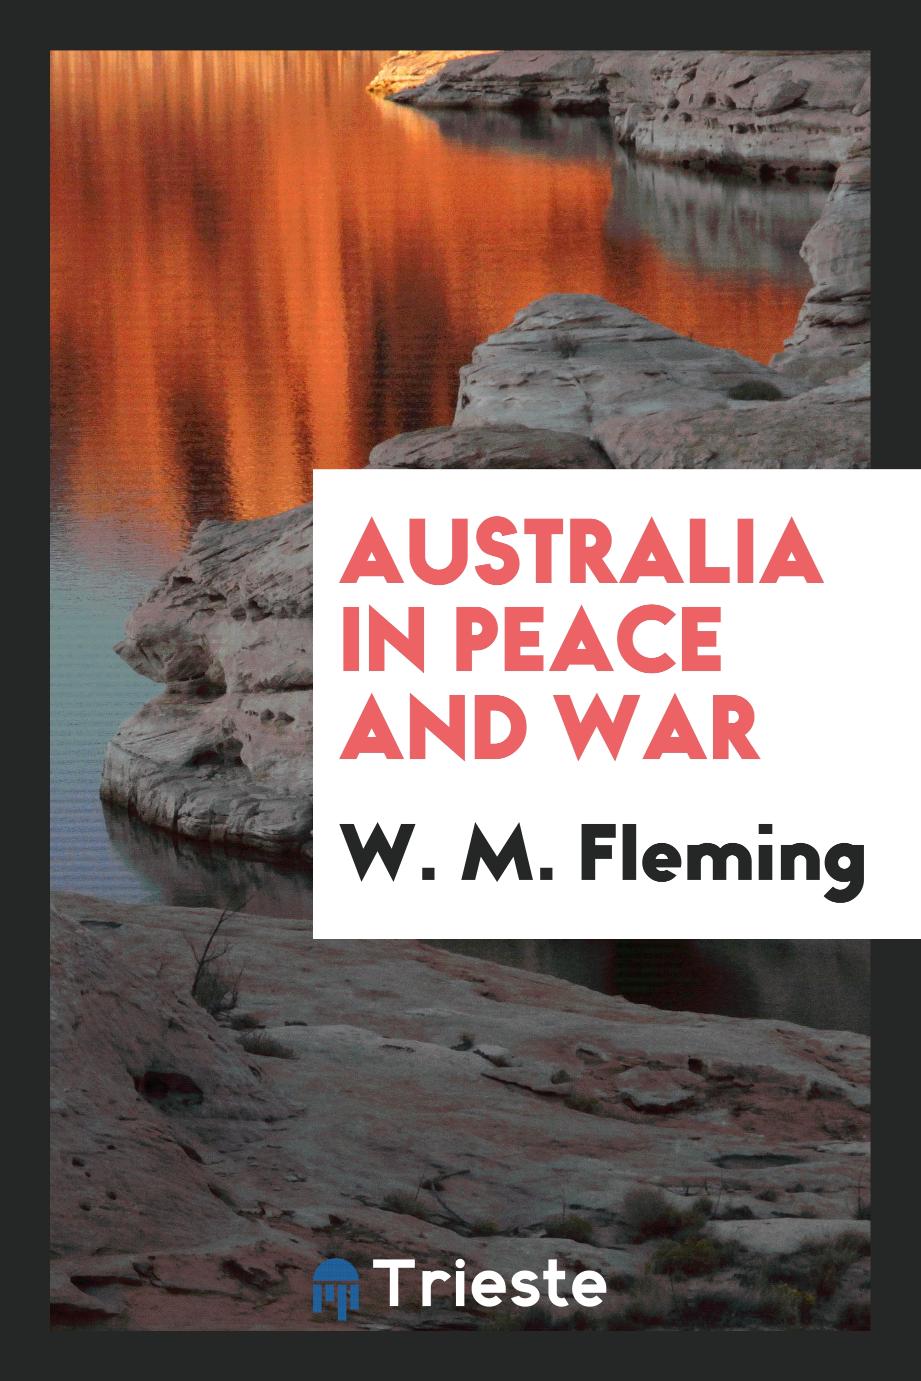 Australia in peace and war